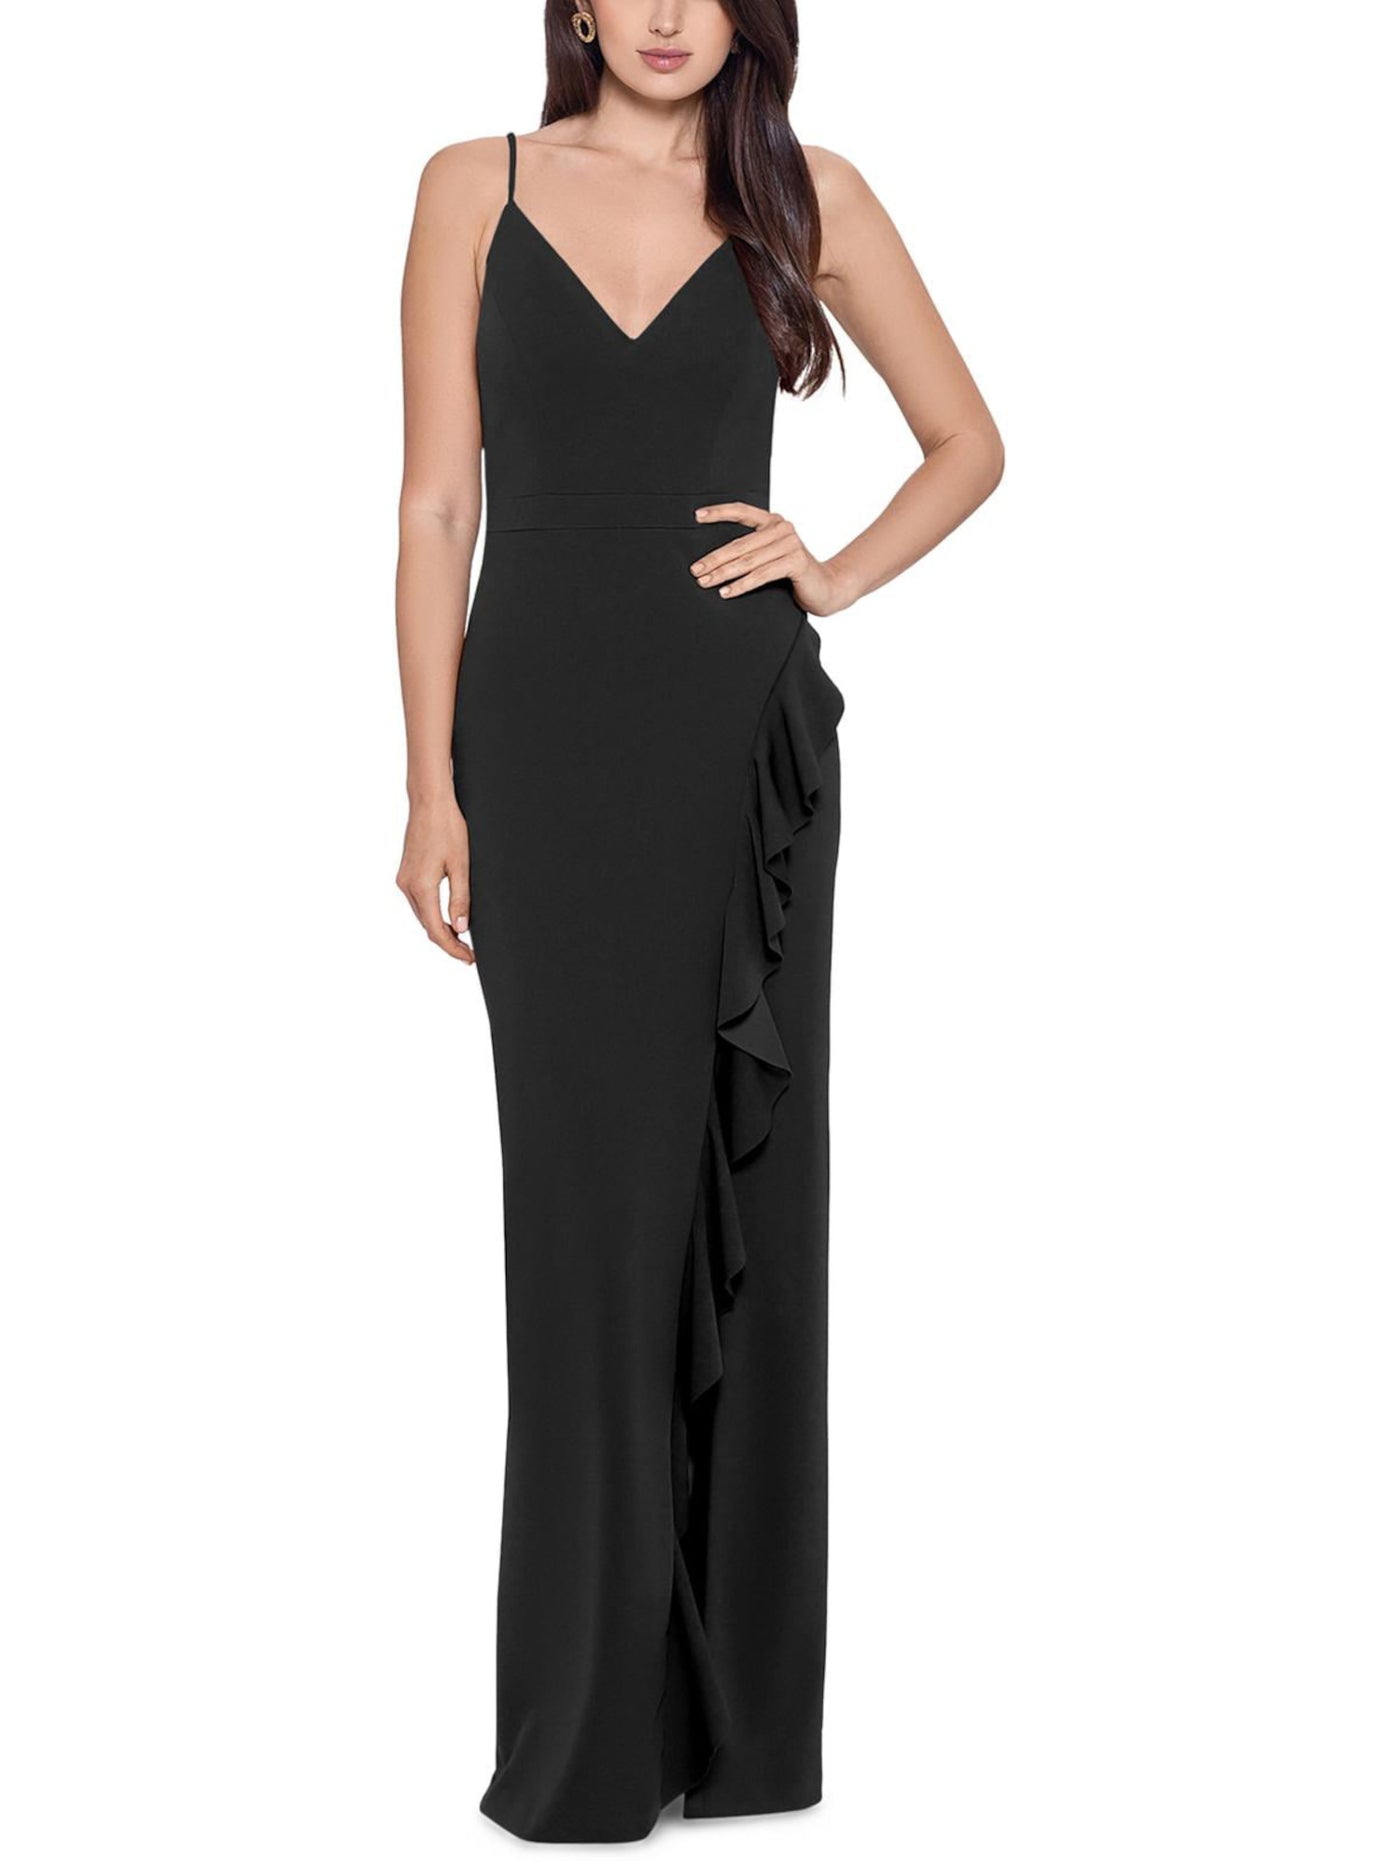 XSCAPE Womens Black Stretch Slitted Zippered Cascade Ruffle Lined Spaghetti Strap V Neck Full-Length Evening Gown Dress 8